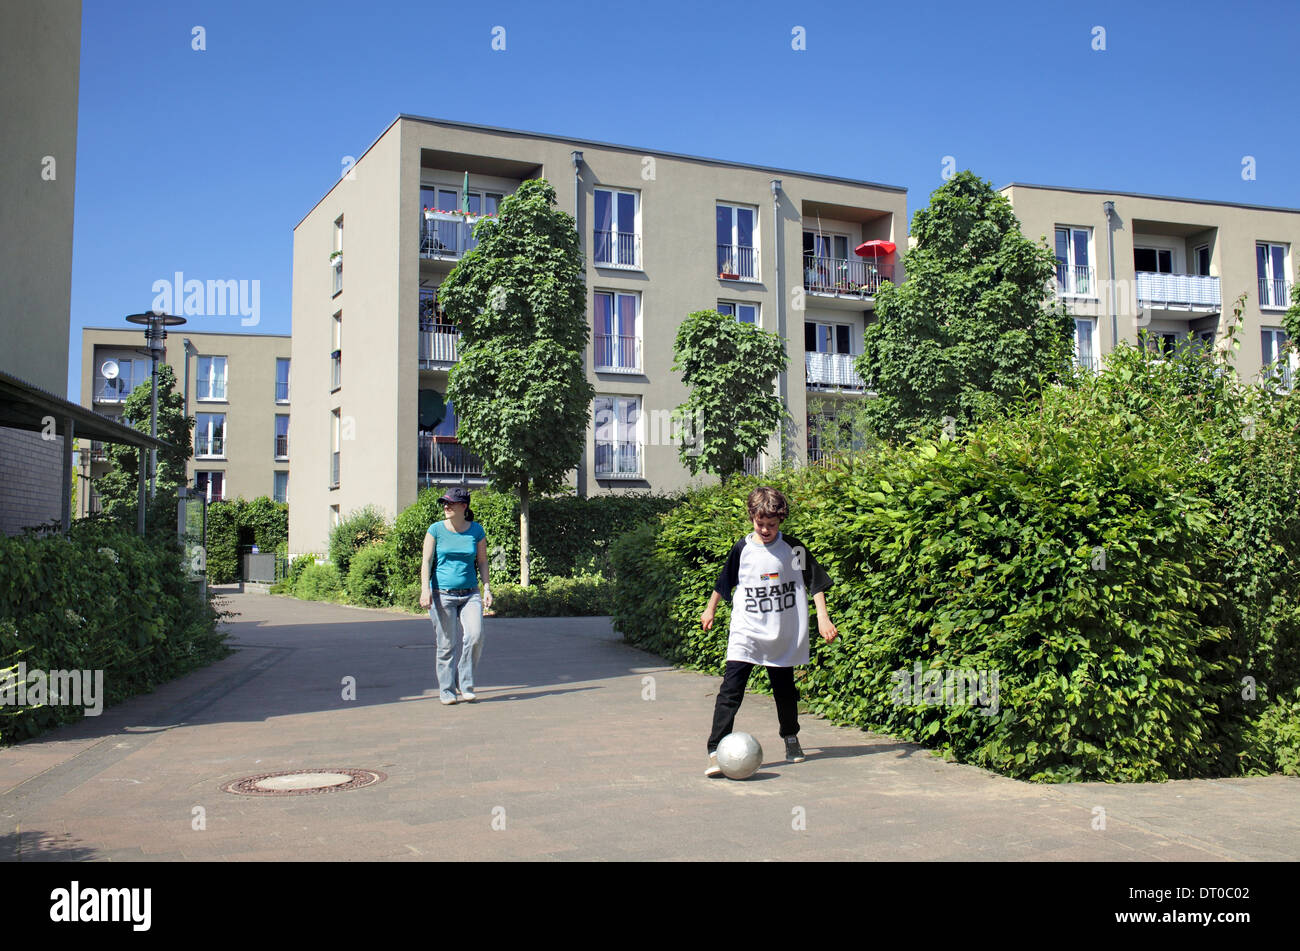 Part of Gartensiedlung Weissenburg, a car free housing development in Münster, Germany. A safe place to kick a football. Stock Photo